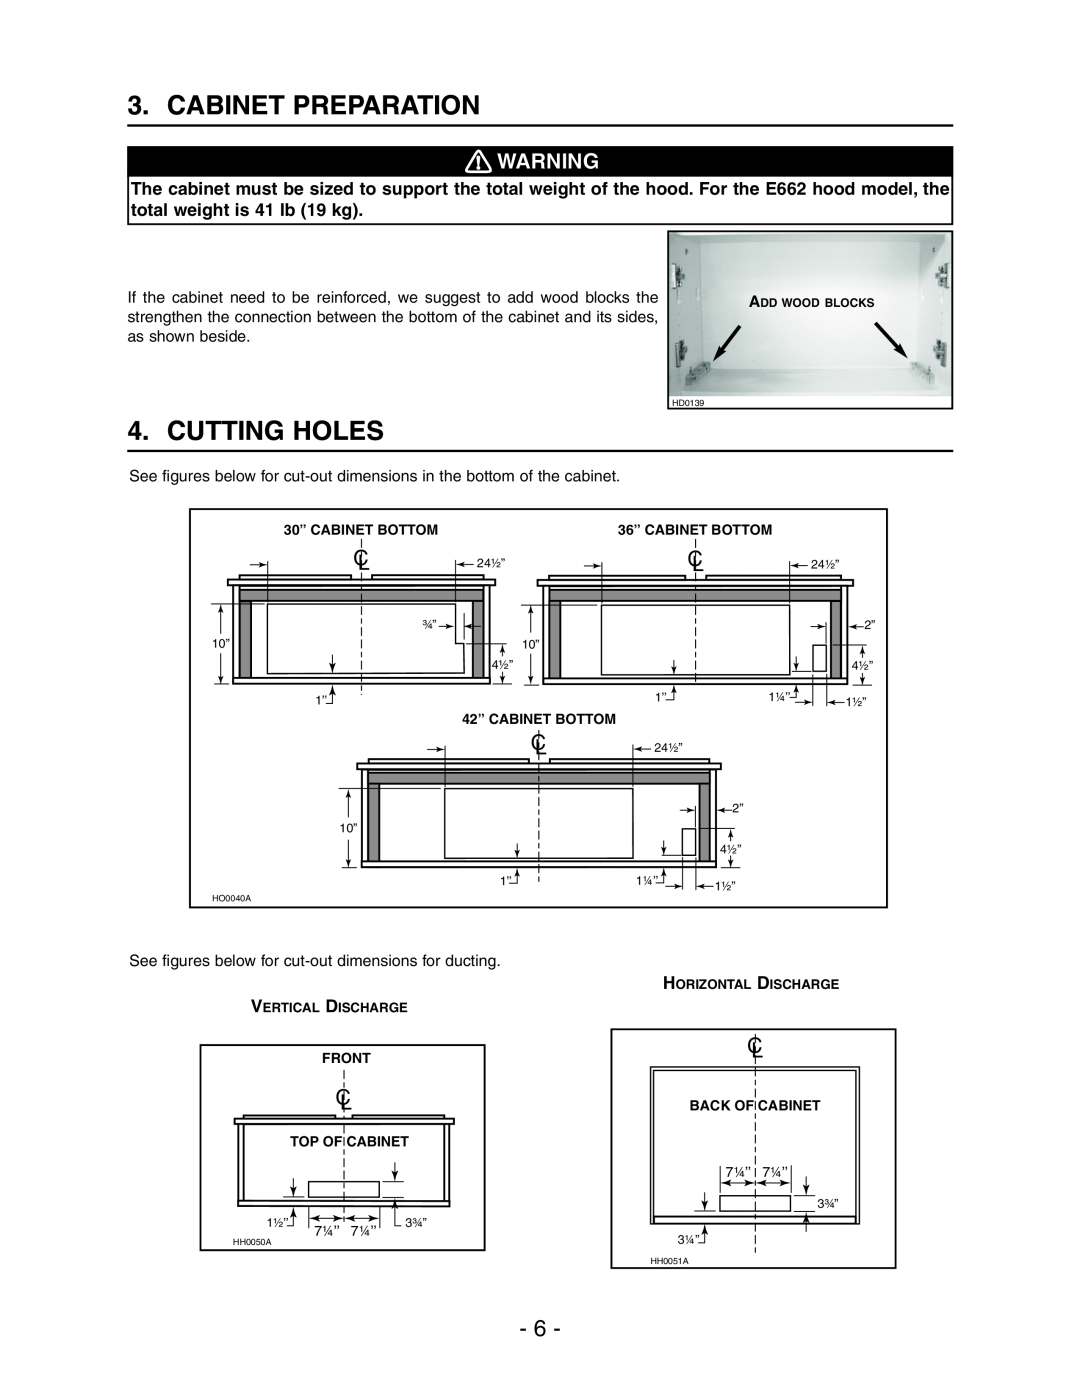 Broan E662 installation instructions Cabinet Preparation, Cutting Holes 